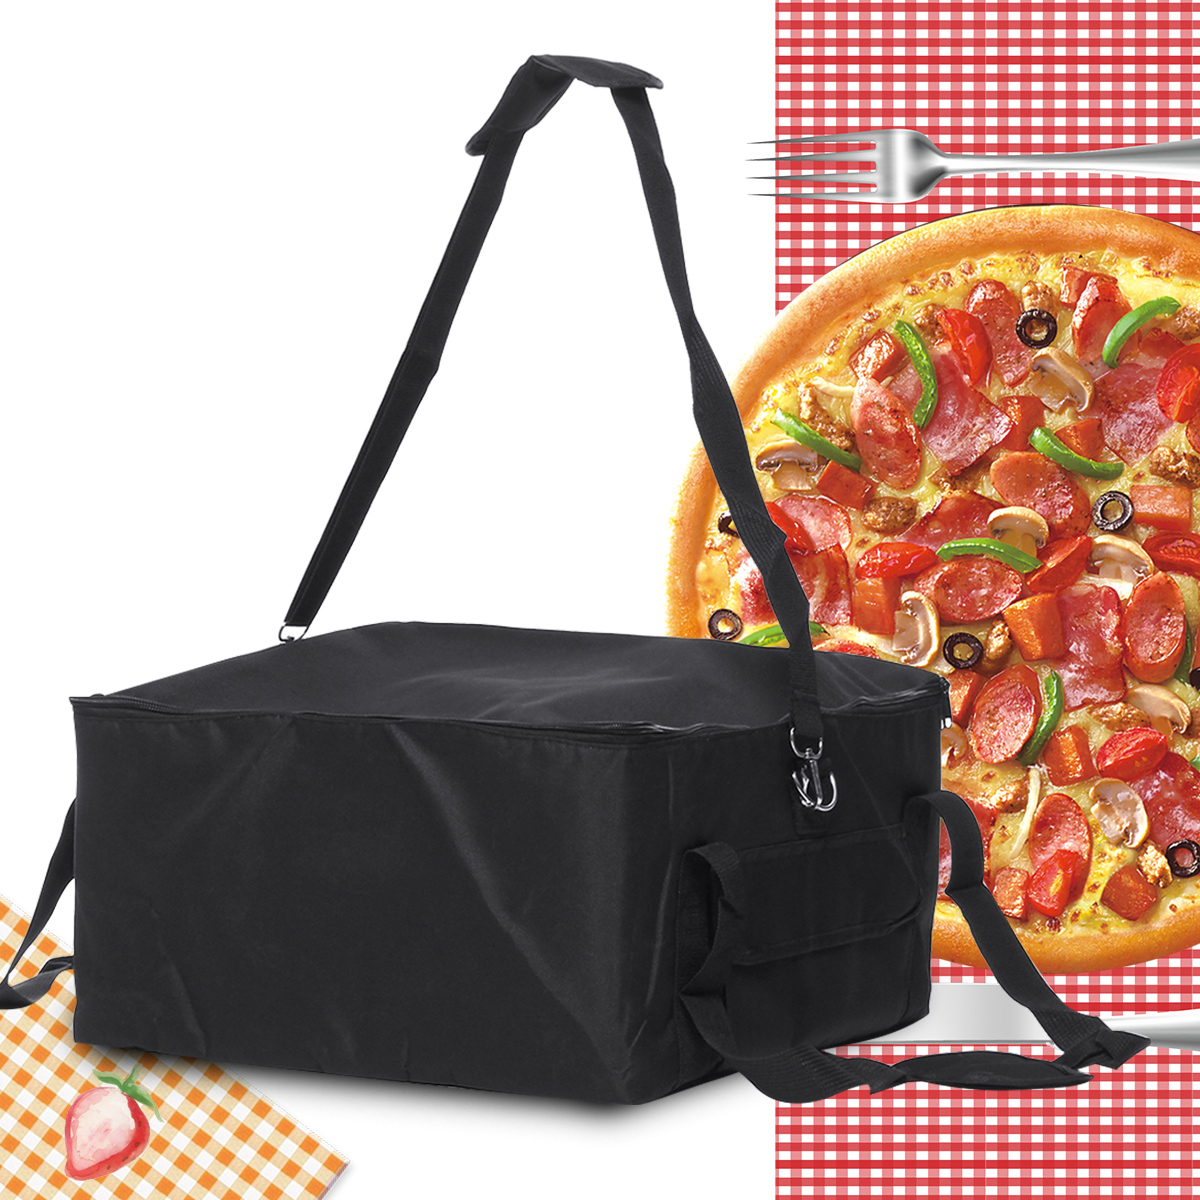 16'' Pizza Food Delivery Bag Insulated Thermal Nylon Holds Bag Aluminium Foil Packing Bag